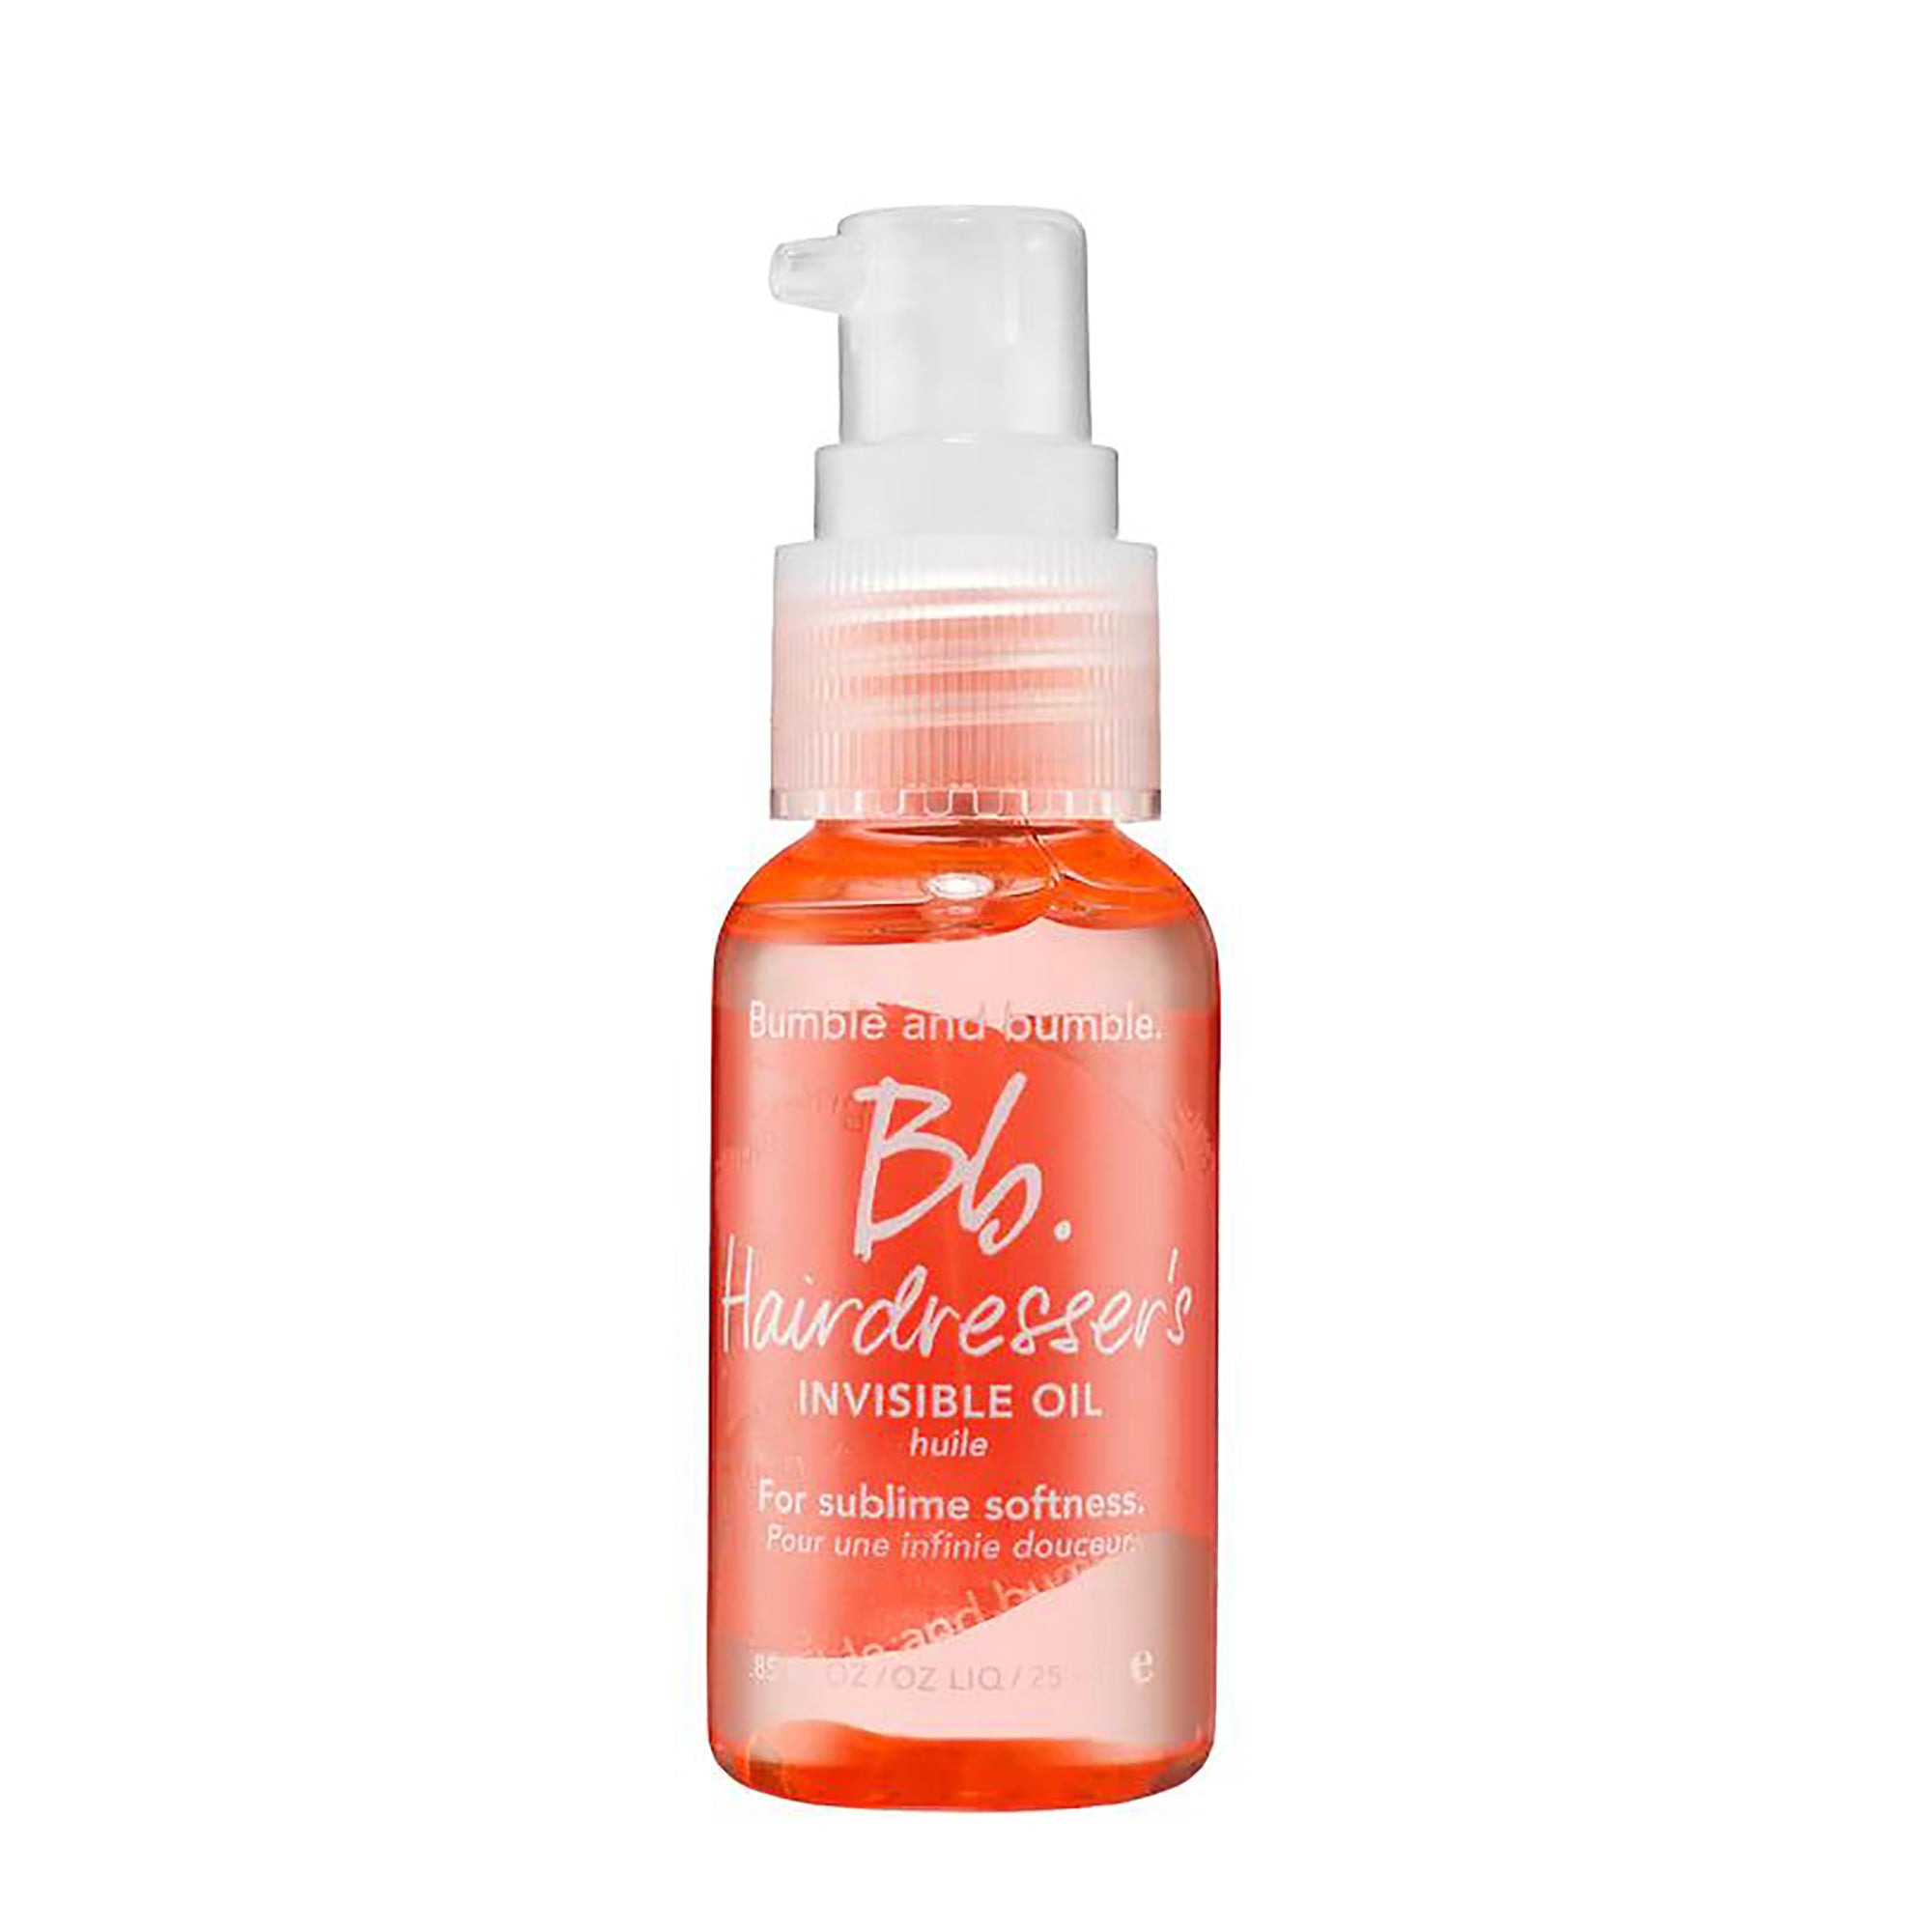 Bumble and bumble Hairdresser's Invisible Oil / 0.8OZ